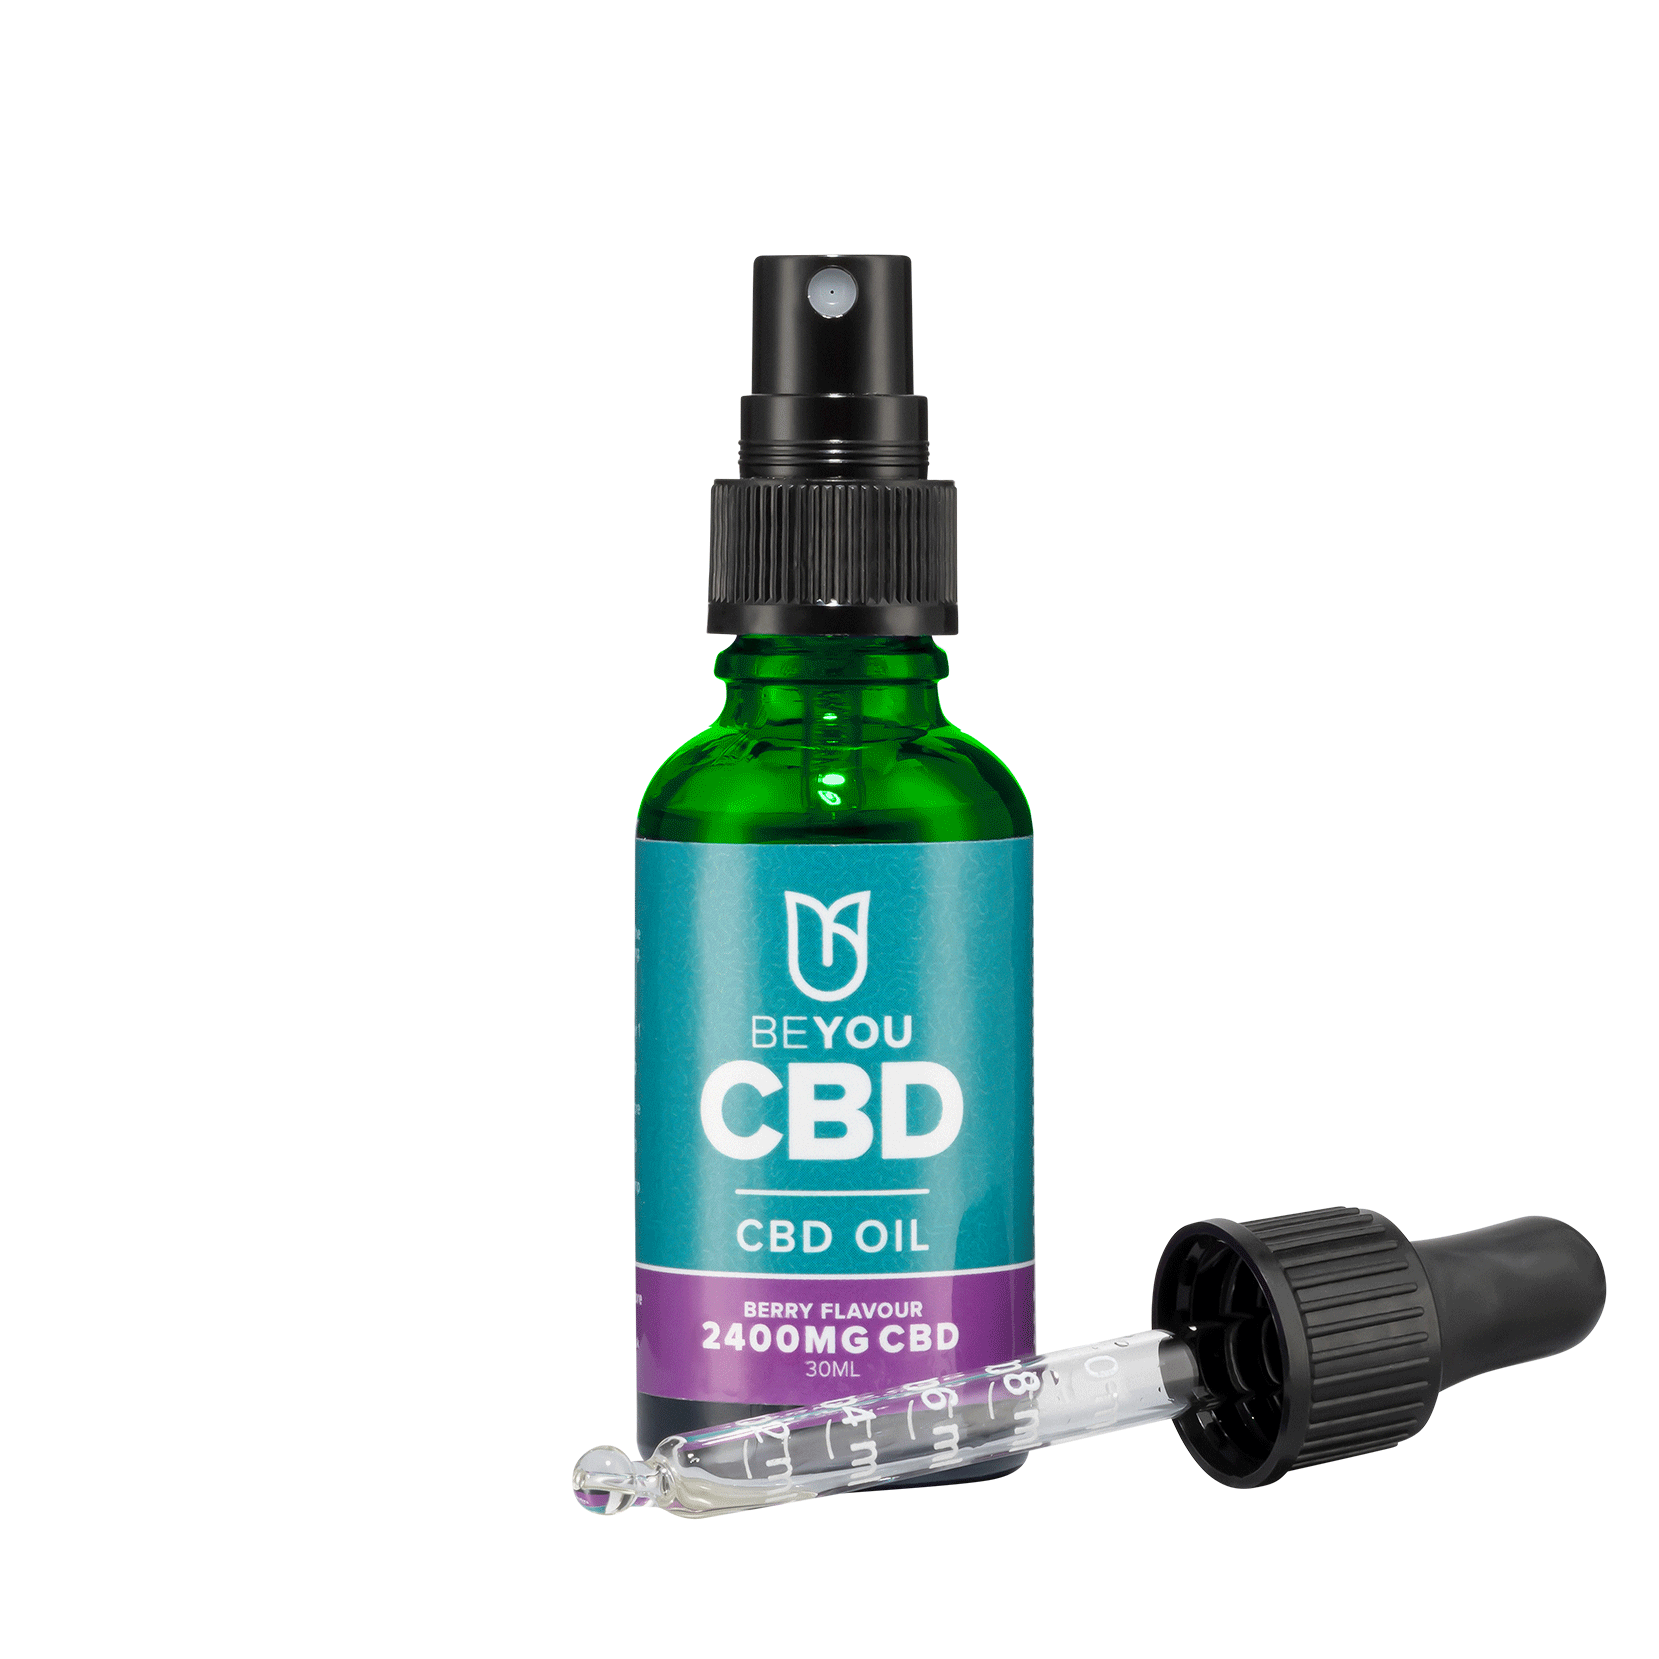 BeYou has the best CBD oil to buy in the UK